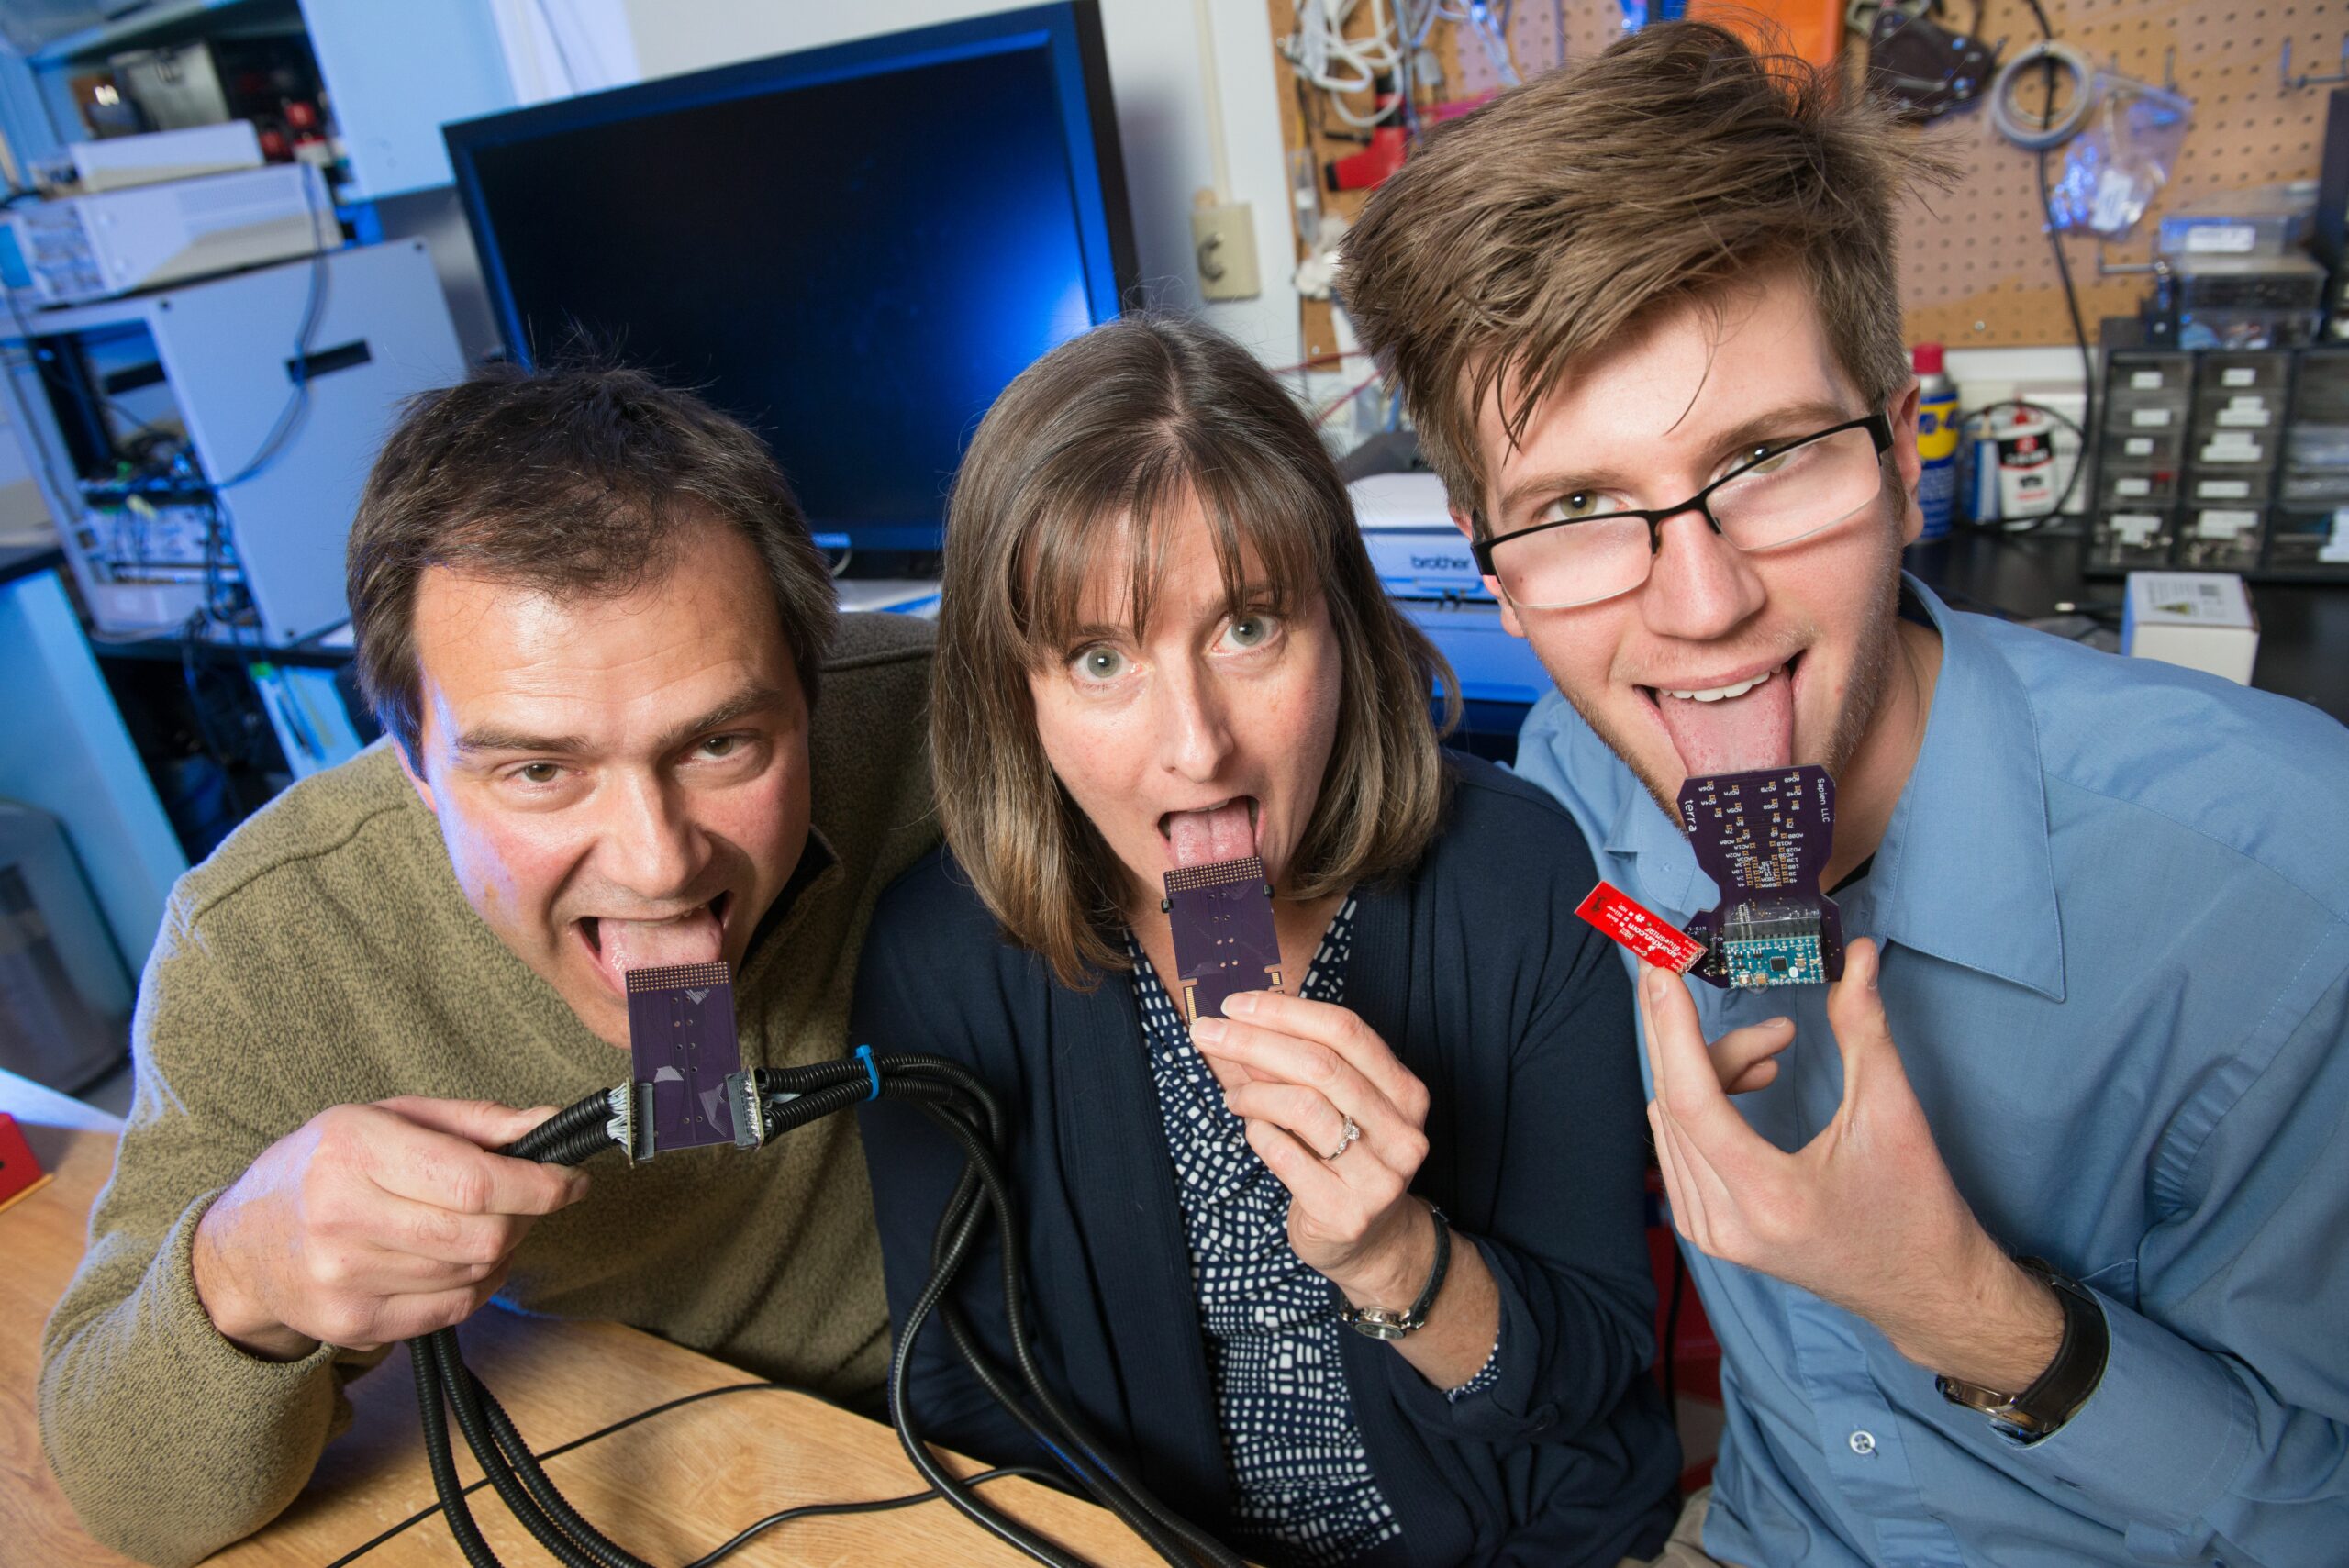 Prototype Retainer Could Help Hearing-Impaired ‘Listen’ With Their Tongues